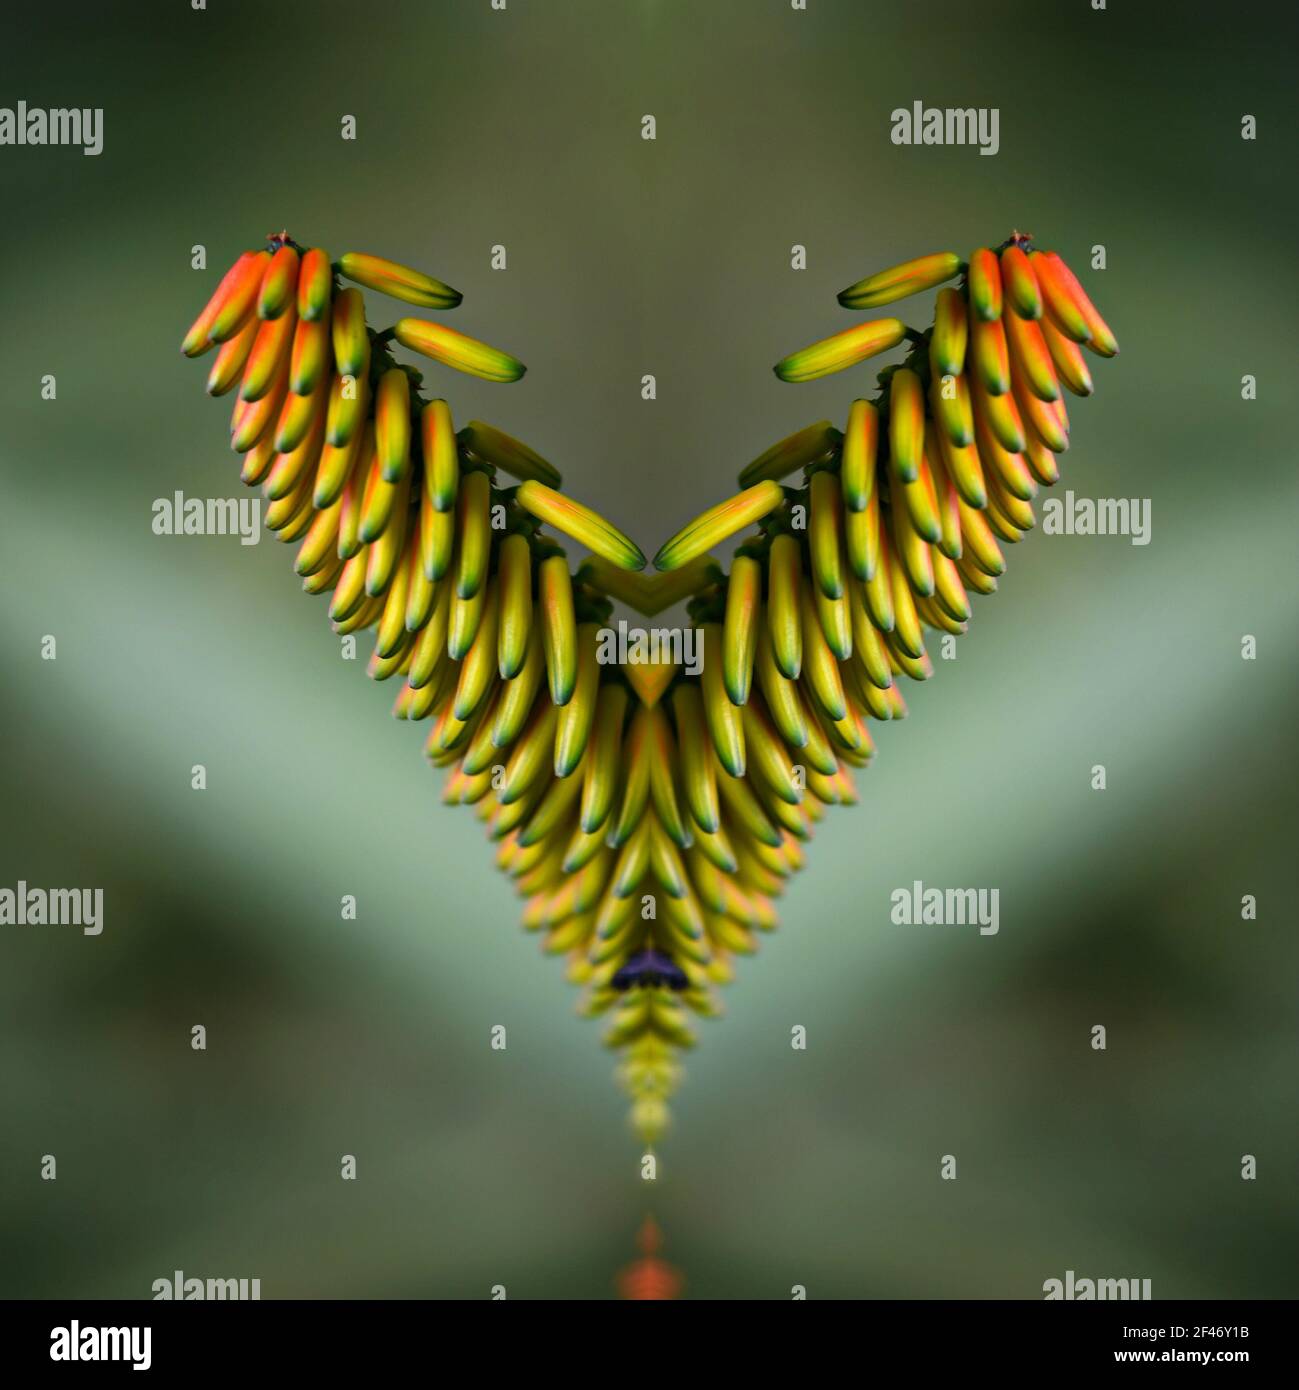 Bromeliad buds on a heart-shaped abstract composition. Stock Photo